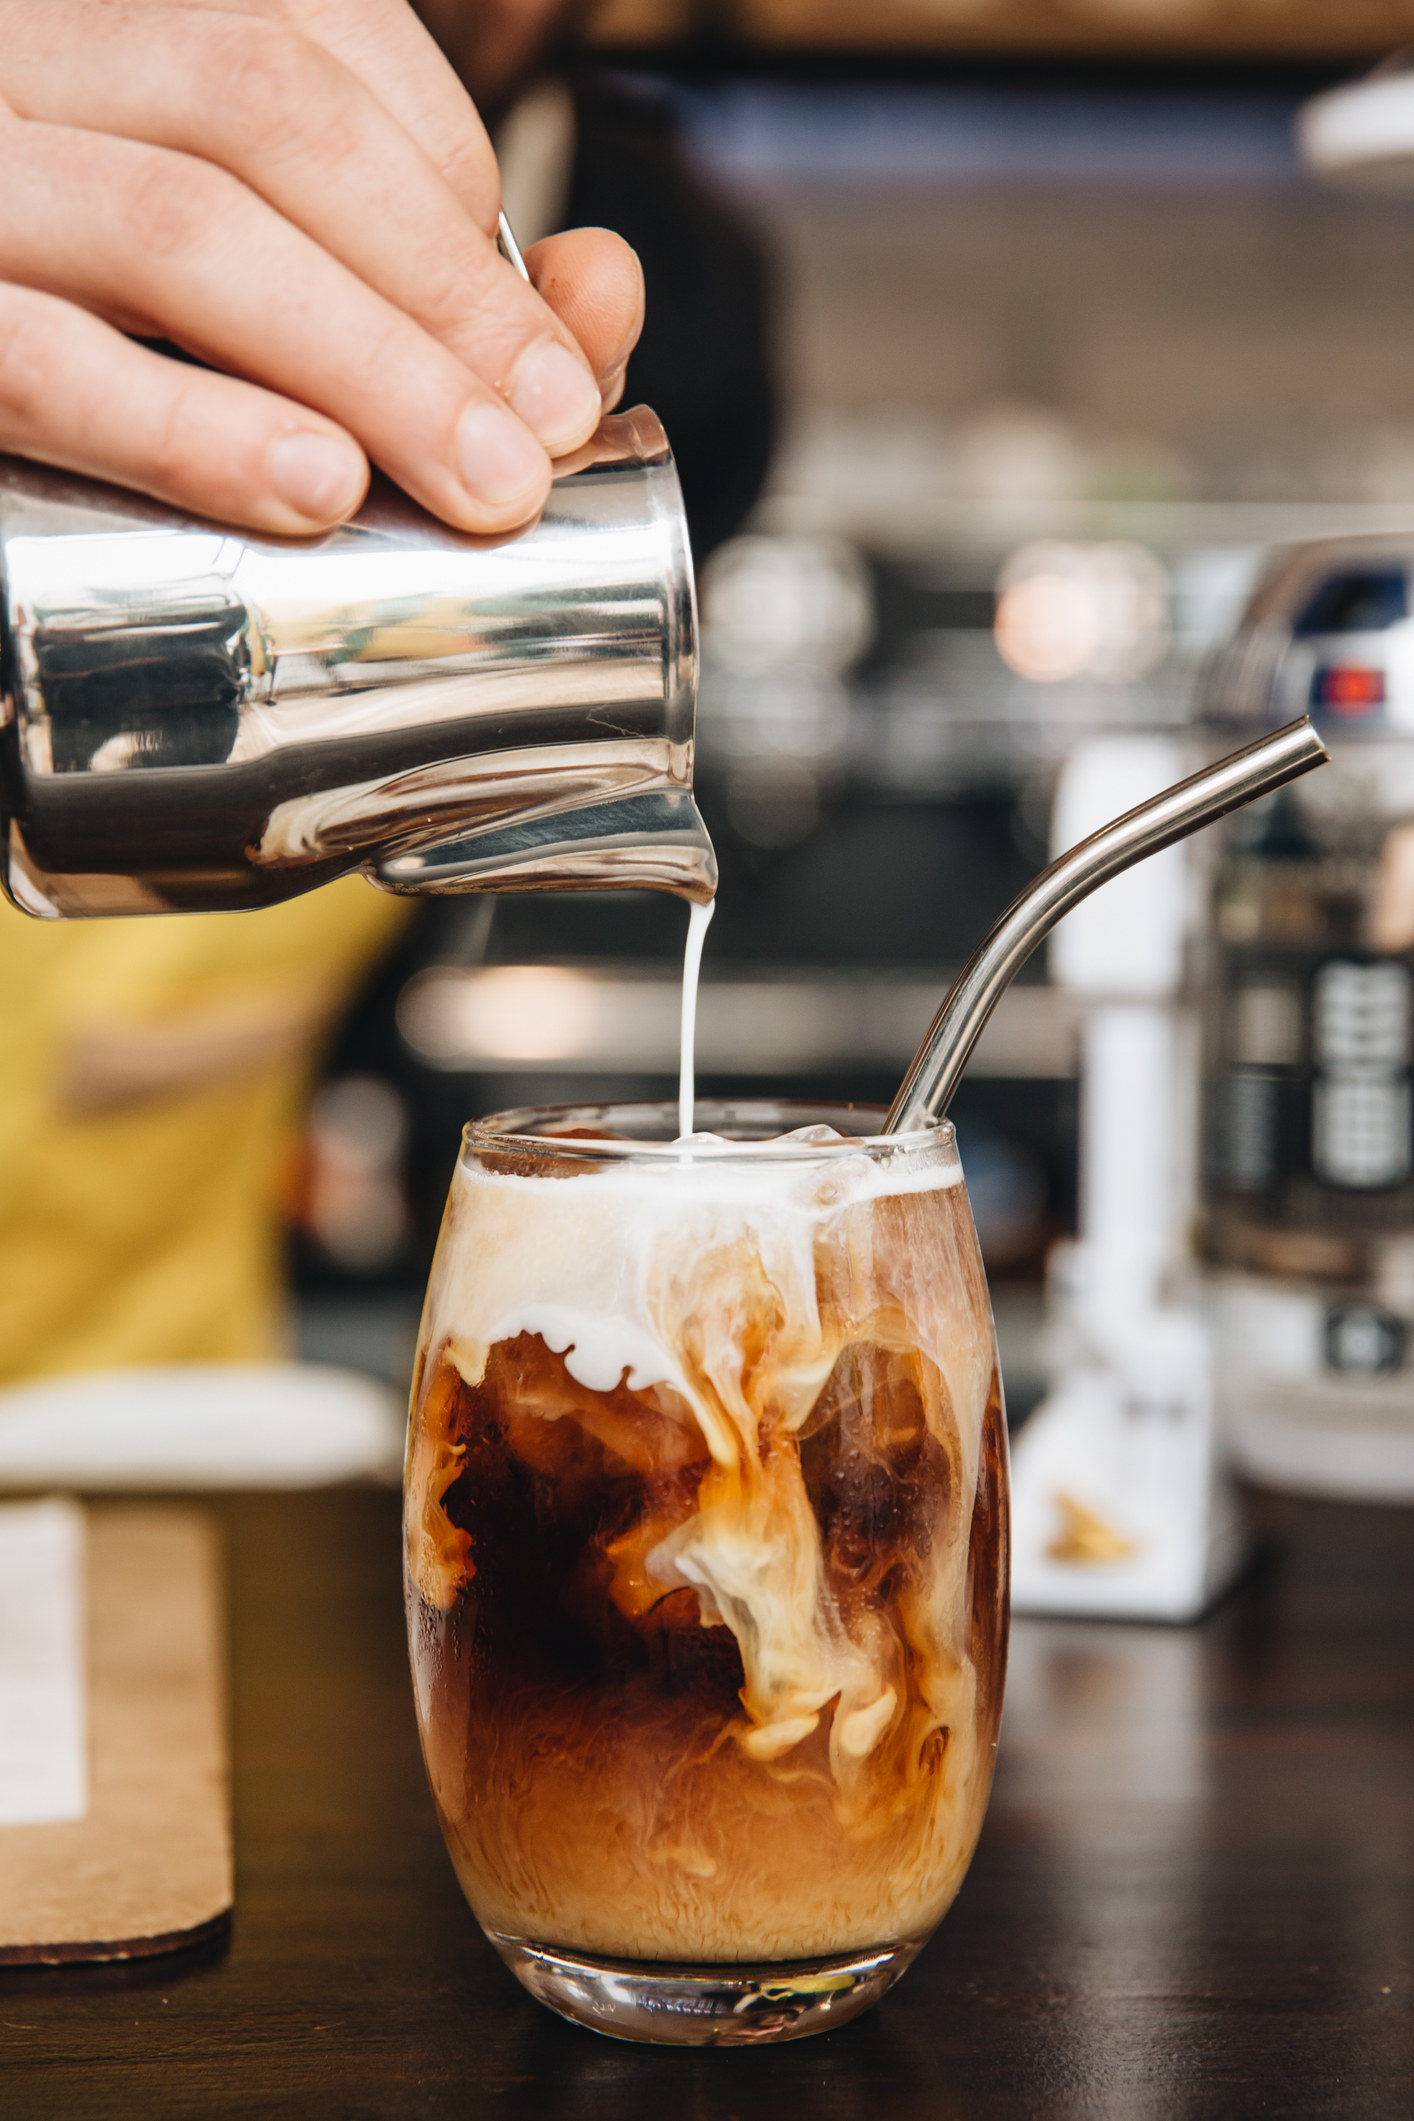 Pouring milk into iced coffee.